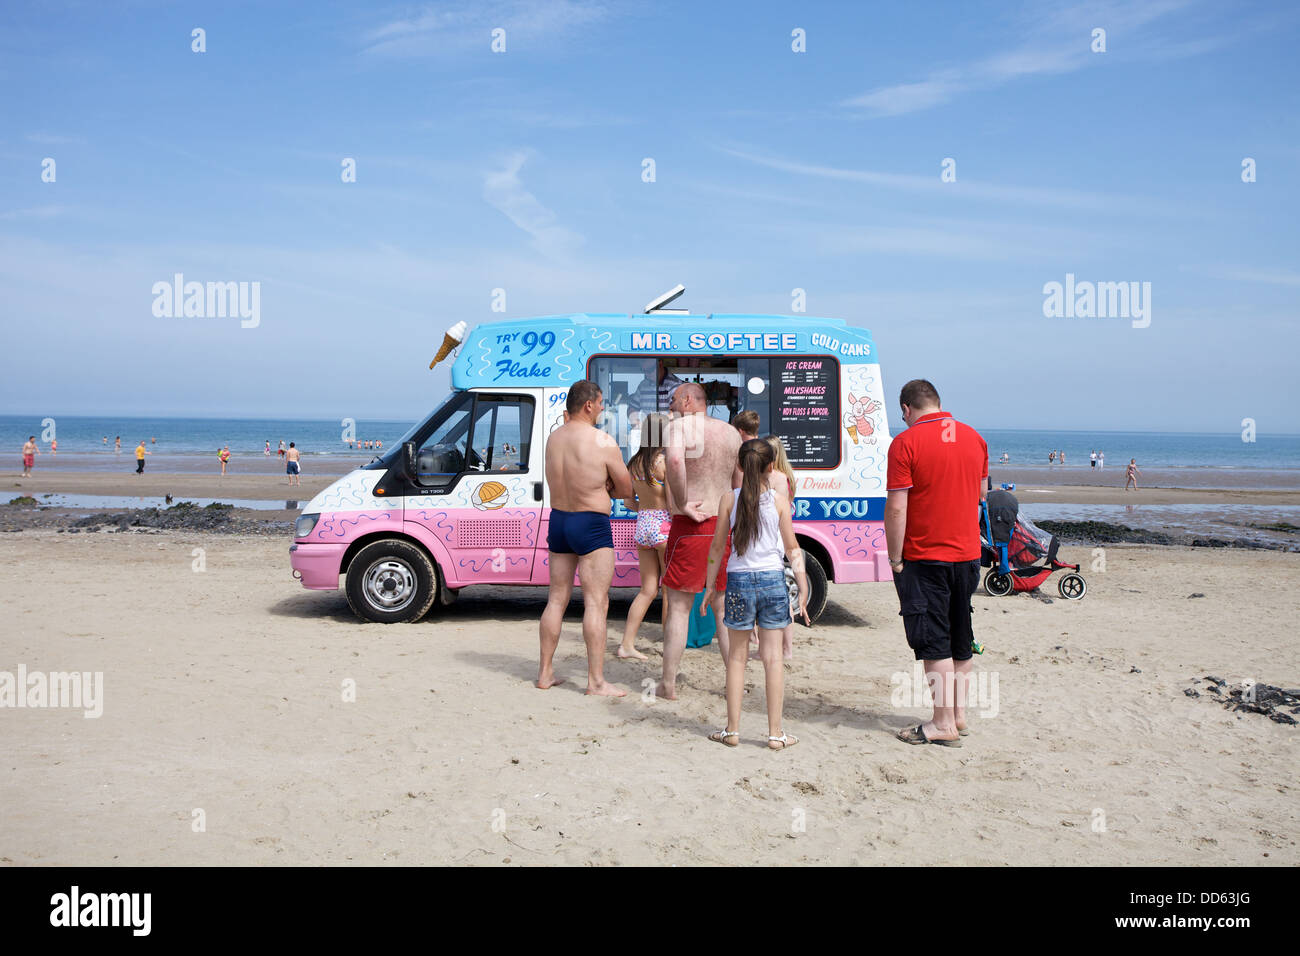 People queuing for an ice cream van at the seaside in Dublin city, Ireland. Stock Photo